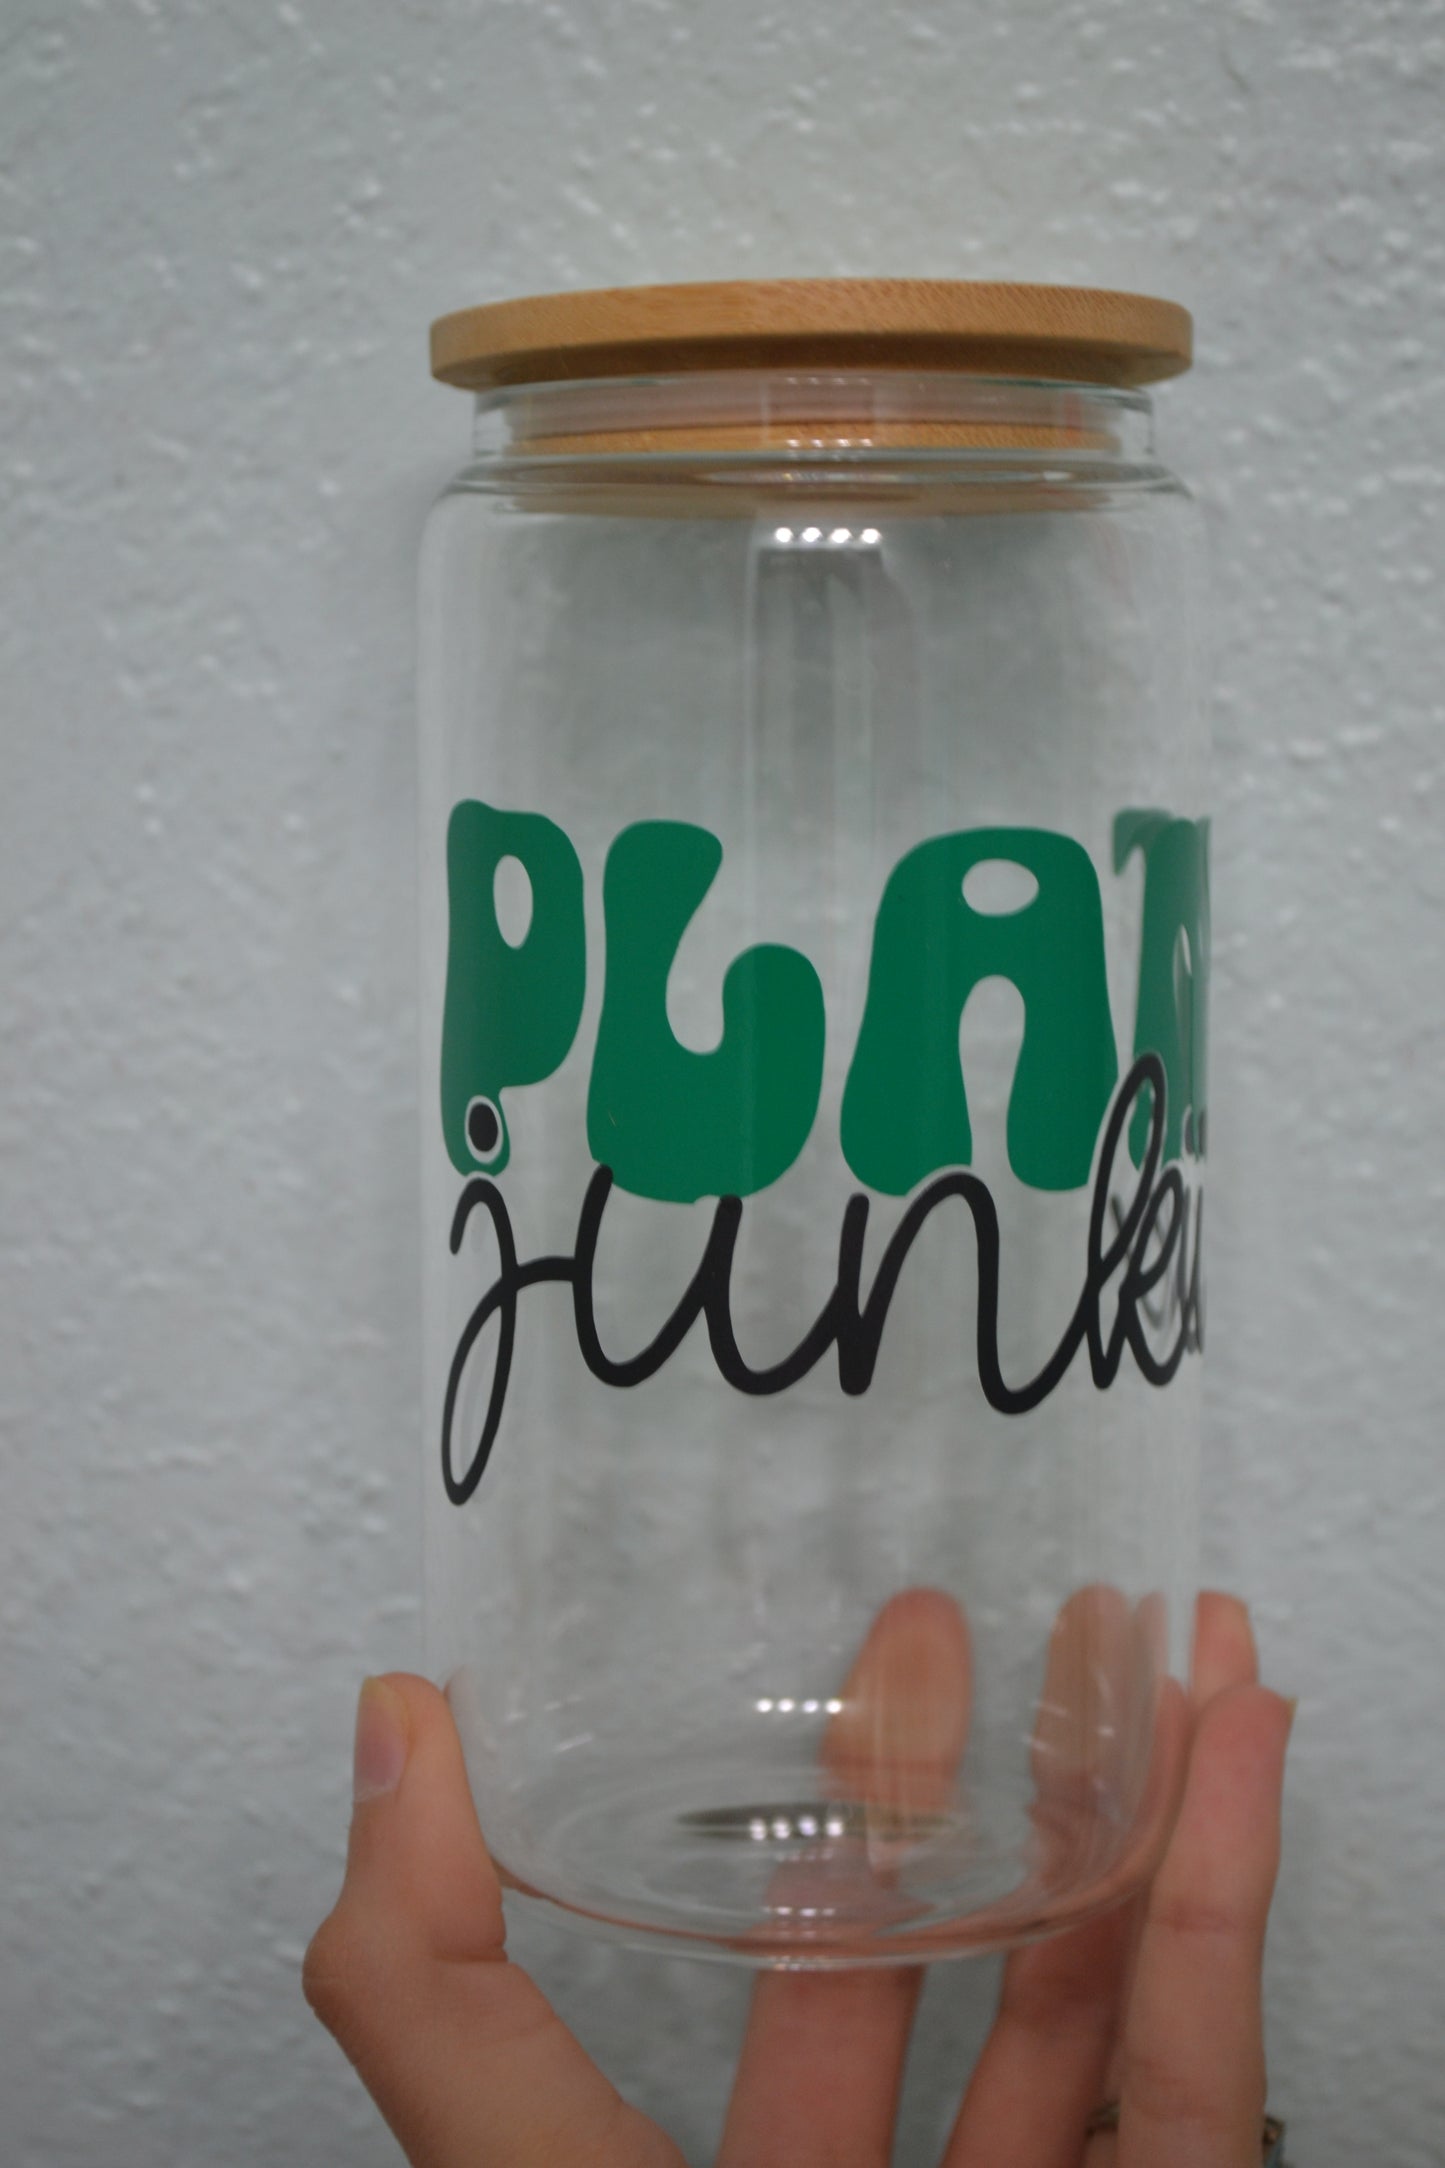 Plant junkie glass can